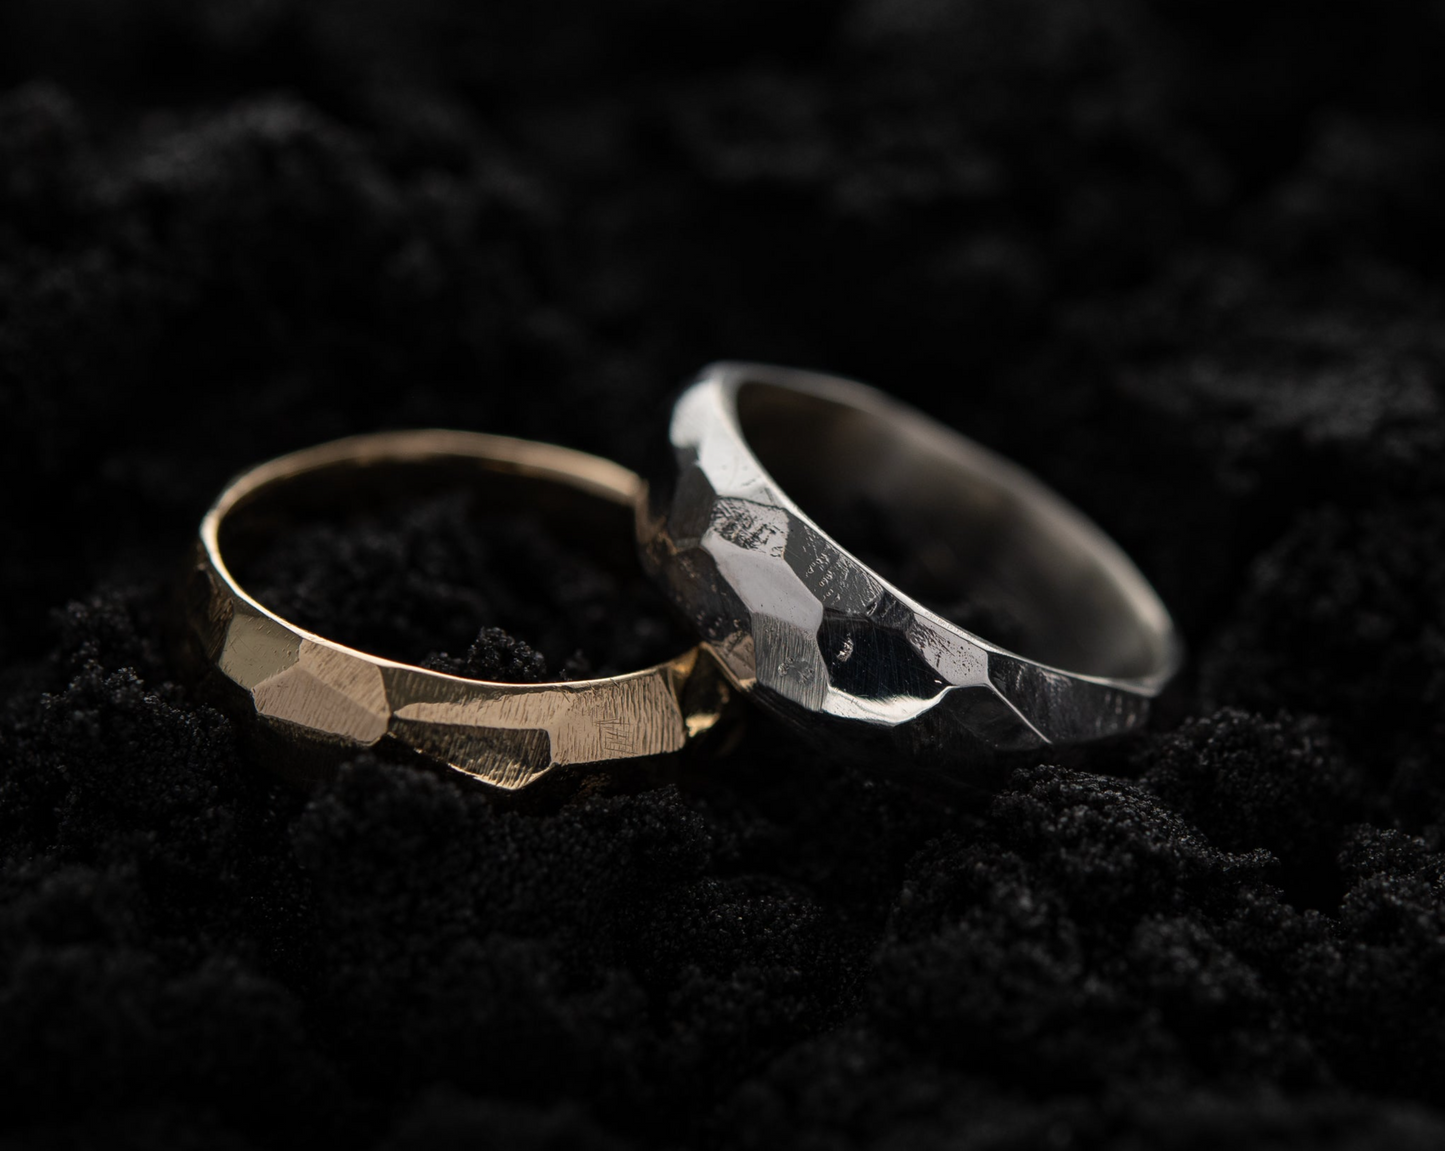 A gold and silver rough cut ring sit in black sand, the silver ring leaning against the gold one.